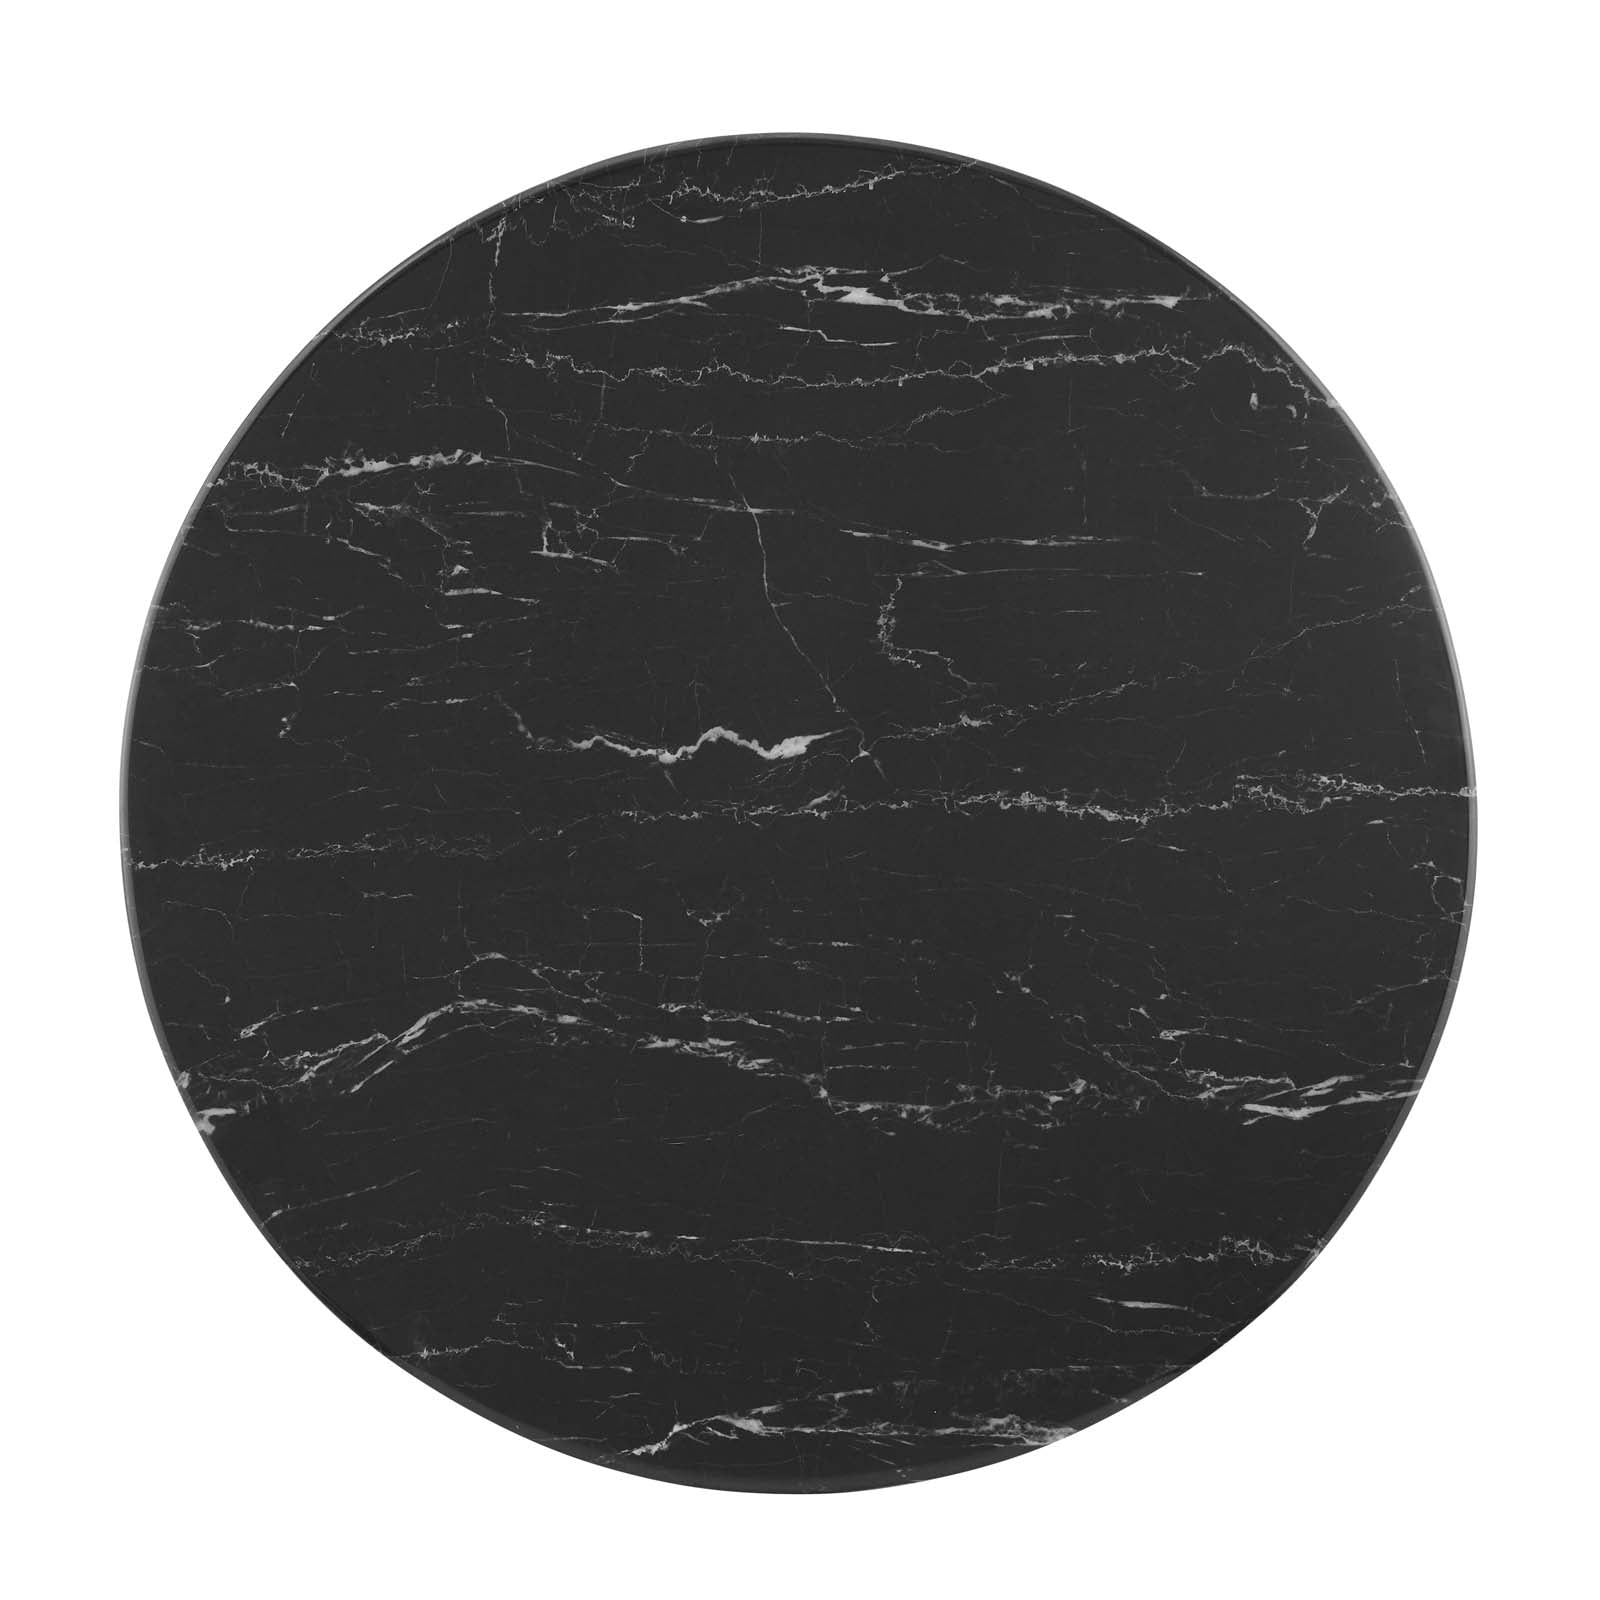 Modway Dining Tables - Tupelo-28"-Artificial-Marble-Dining-Table-Gold-Black